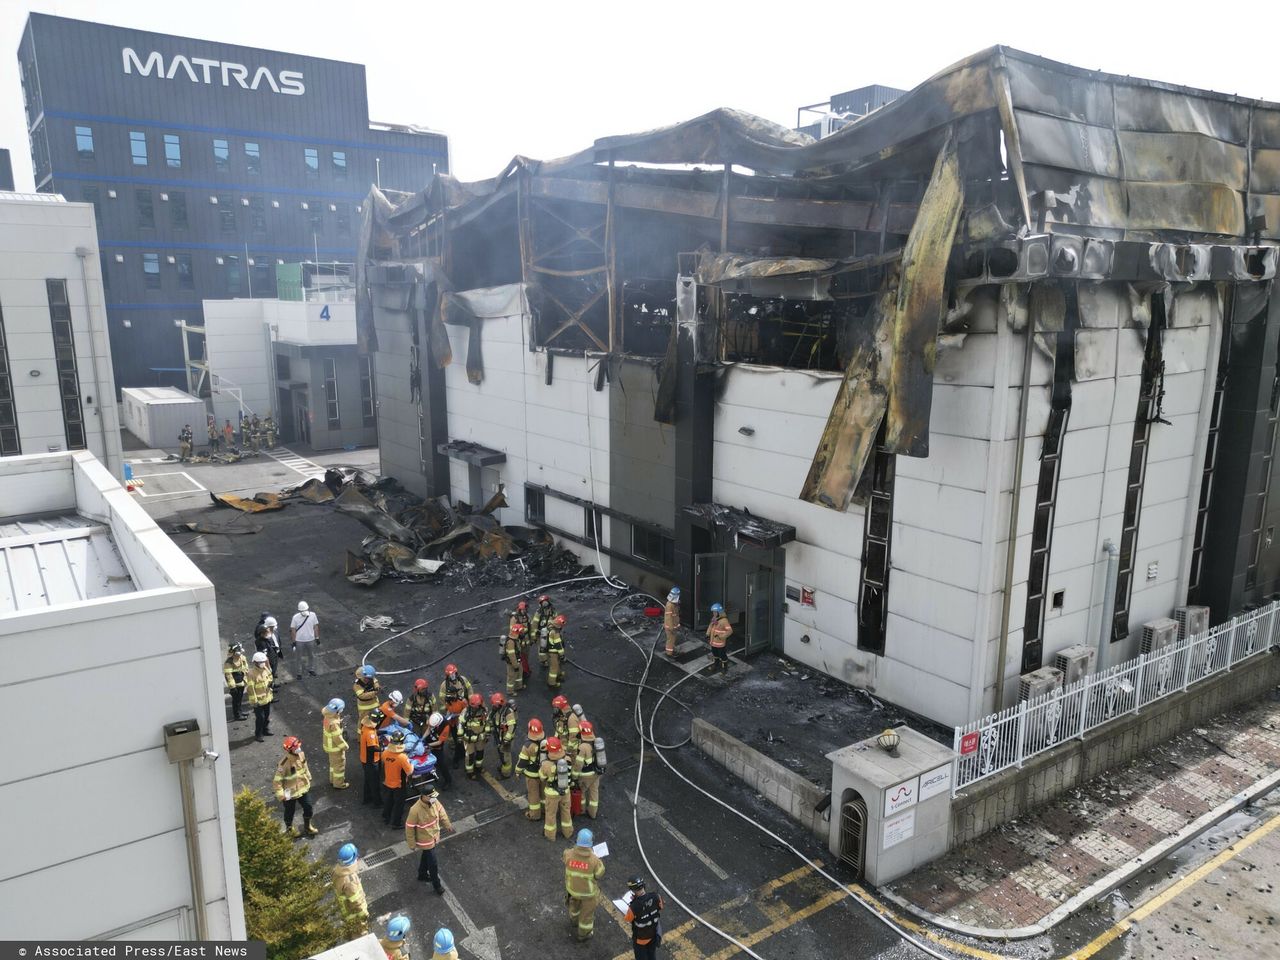 At least 20 people have died in a battery factory fire.